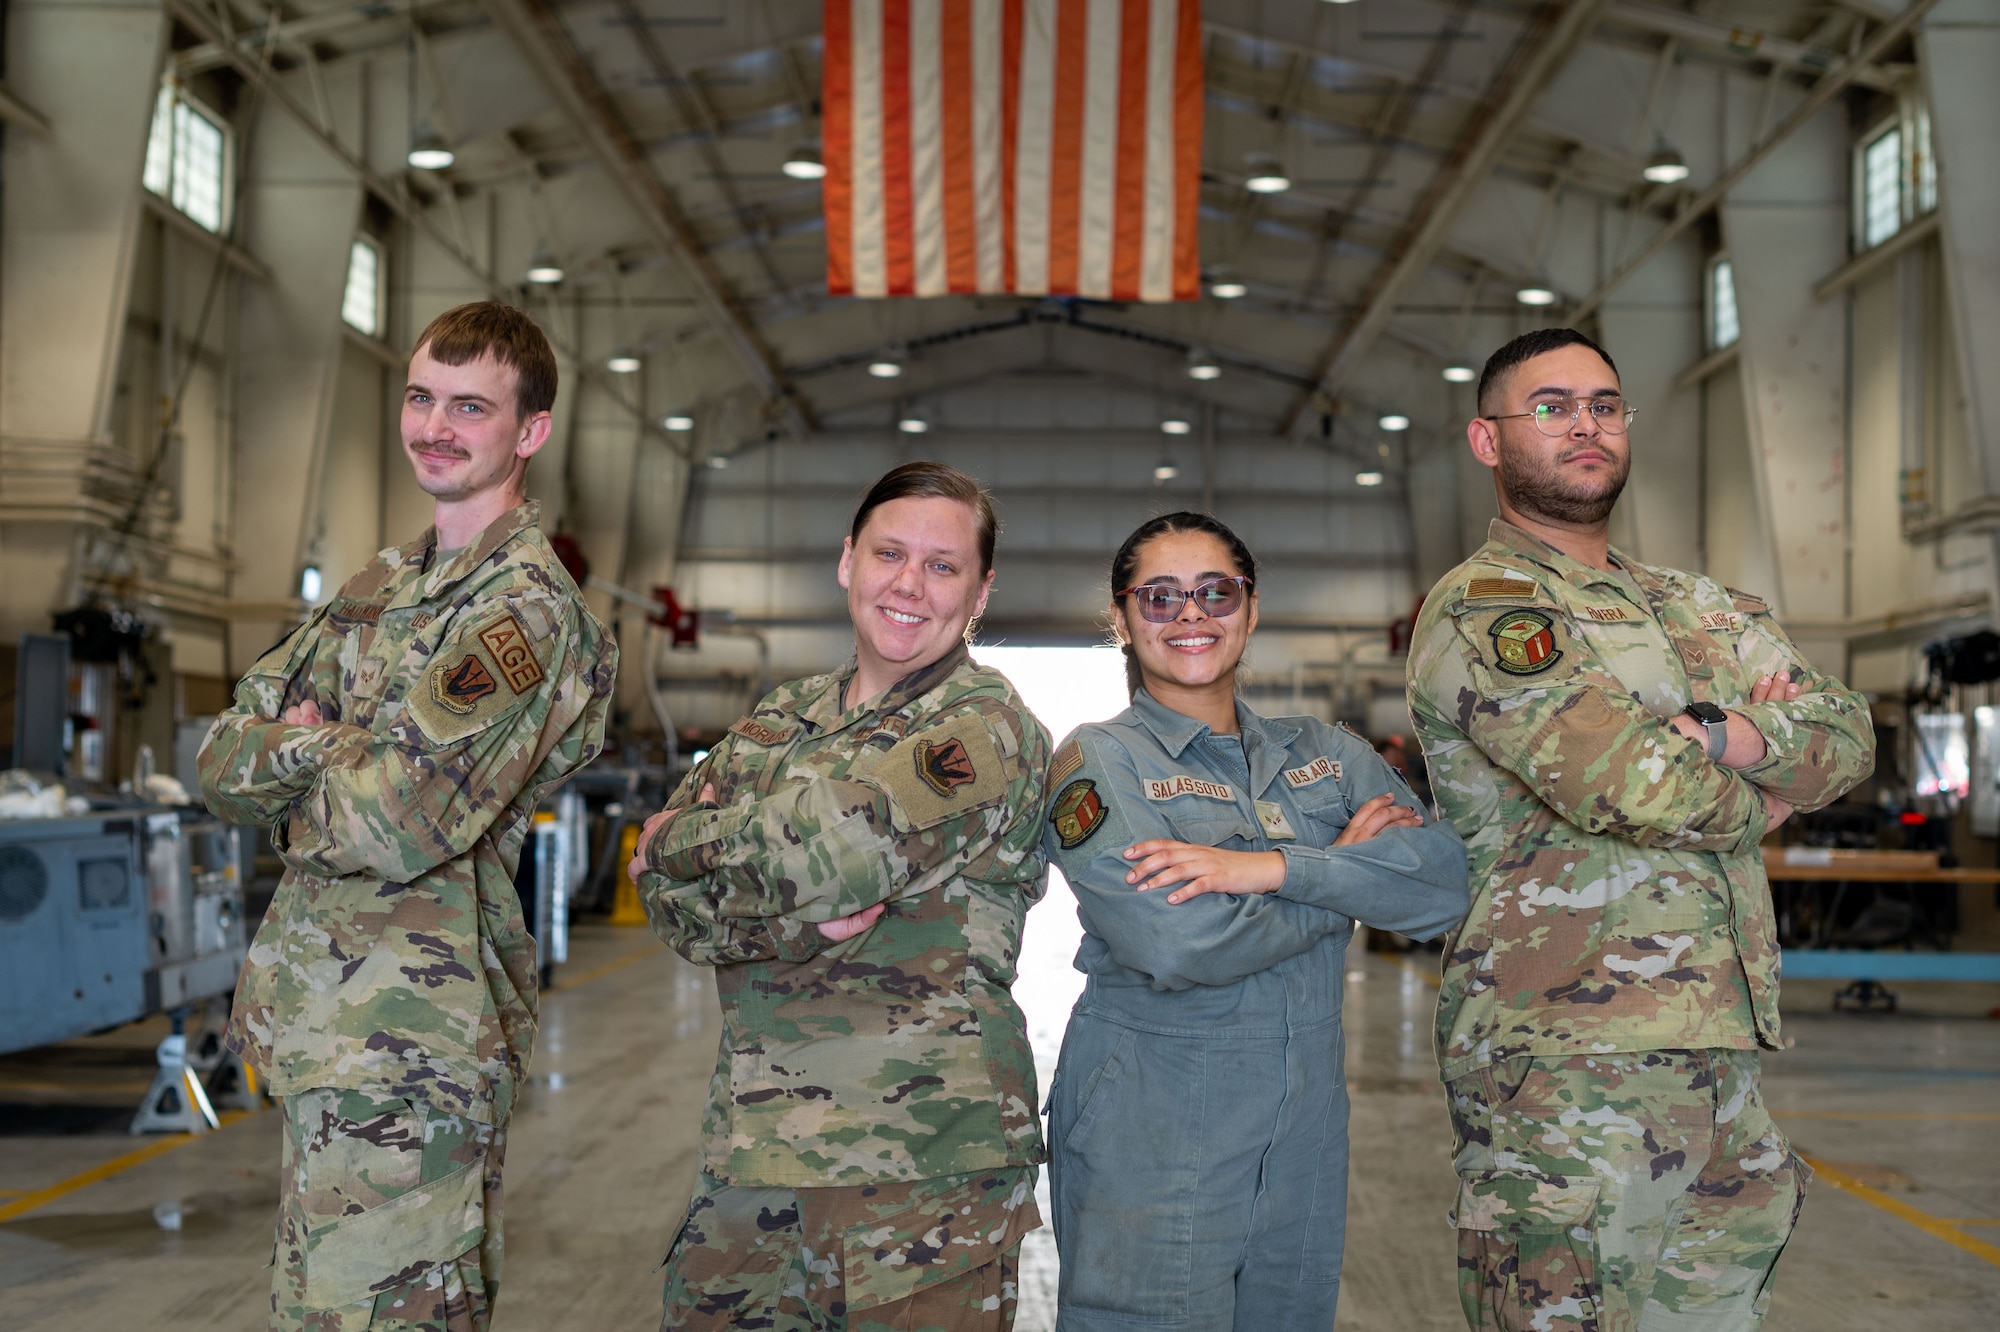 U.S. Airmen assigned to the 20th Equipment Maintenance Squadron aerospace ground equipment flight pose for a portrait at Shaw Air Force Base, S.C., March 6, 2024. Making auxiliary equipment like generators and nitrogen compressors readily available for aircraft maintainers ensures they can complete their mission safely and effectively. (U.S. Air Force photo by Airman 1st Class Kyrii Richardson)